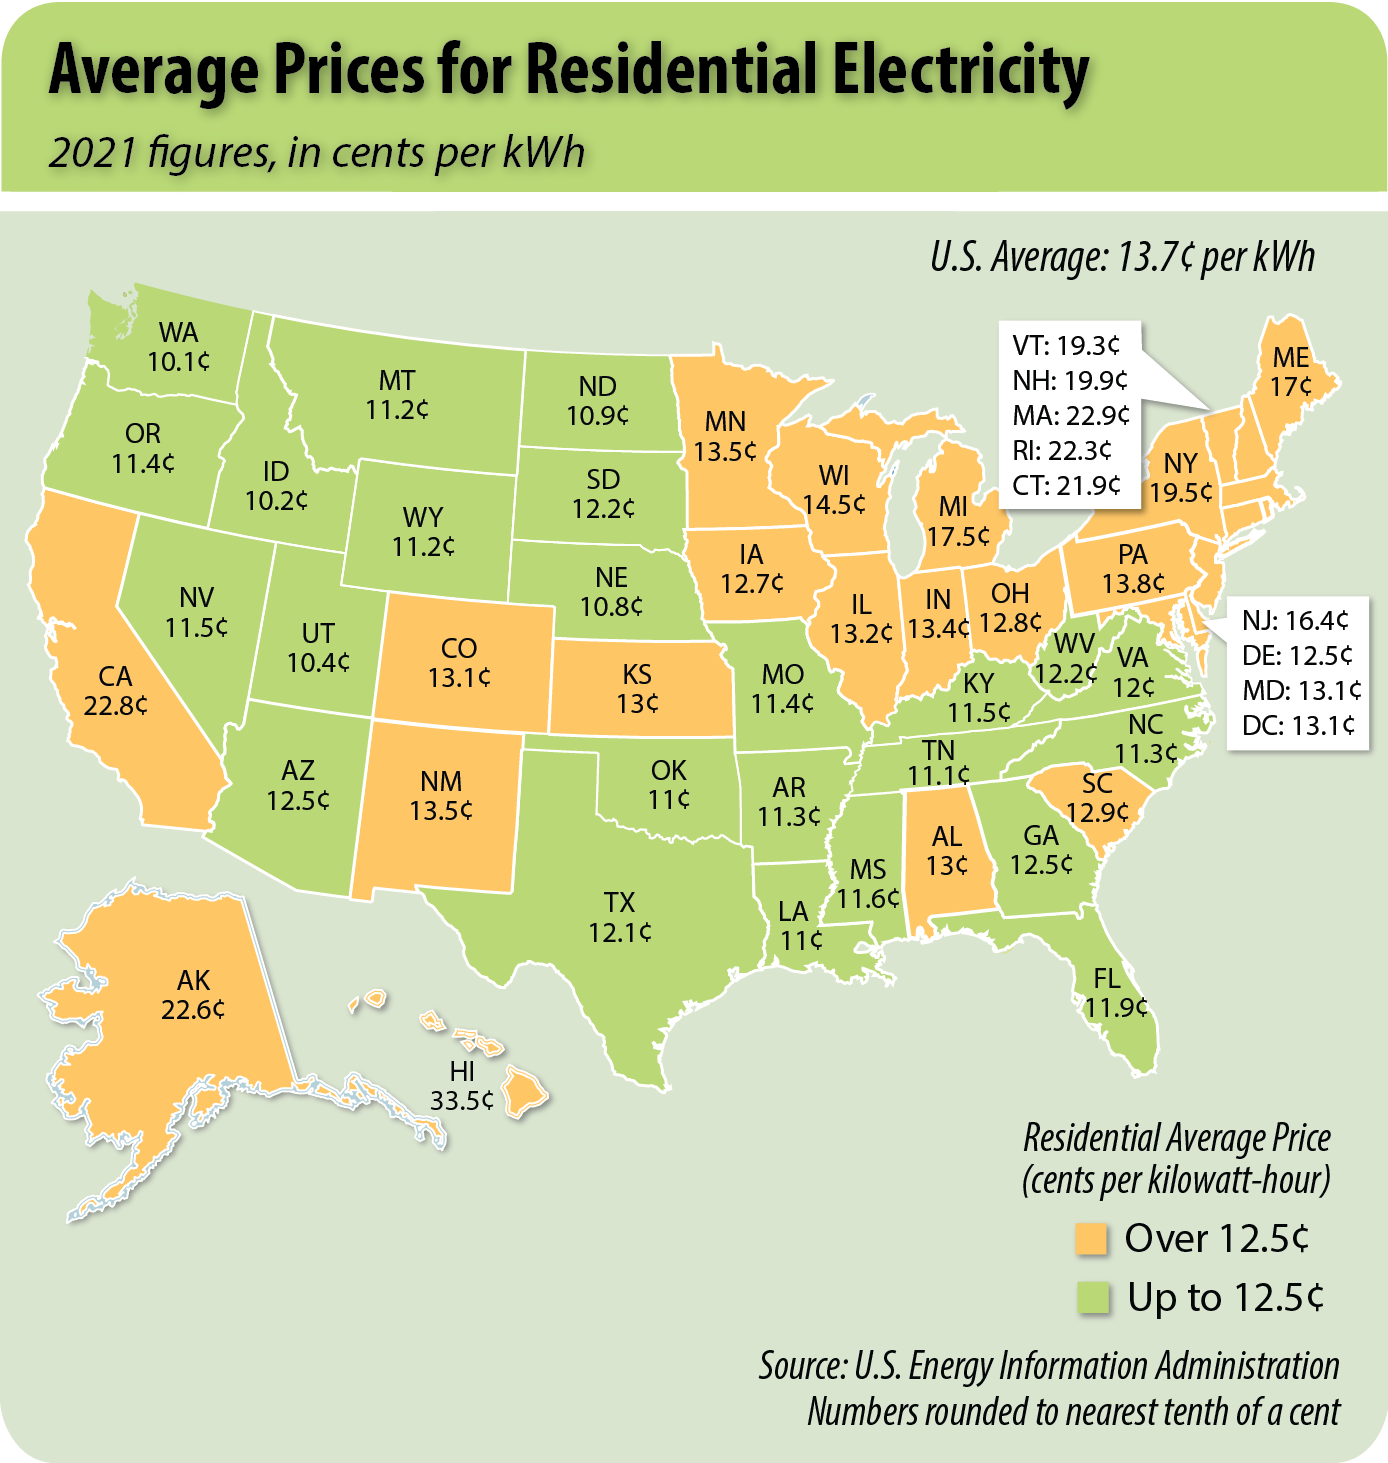 2021 average prices for residential electricity in the United States